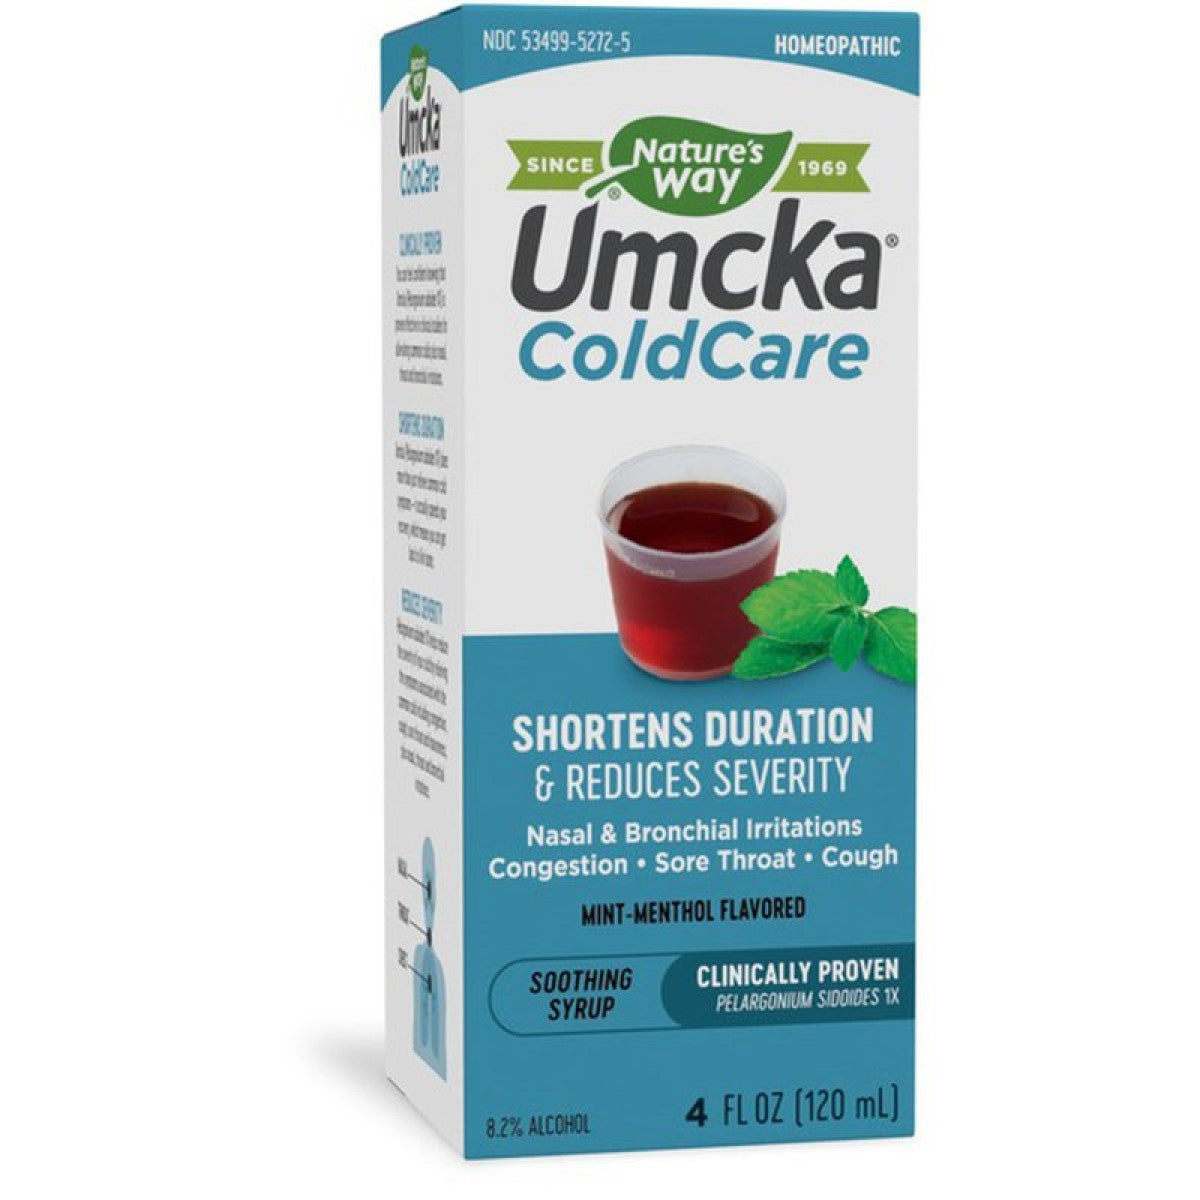 Primary image of Umcka Menthol ColdCare Syrup